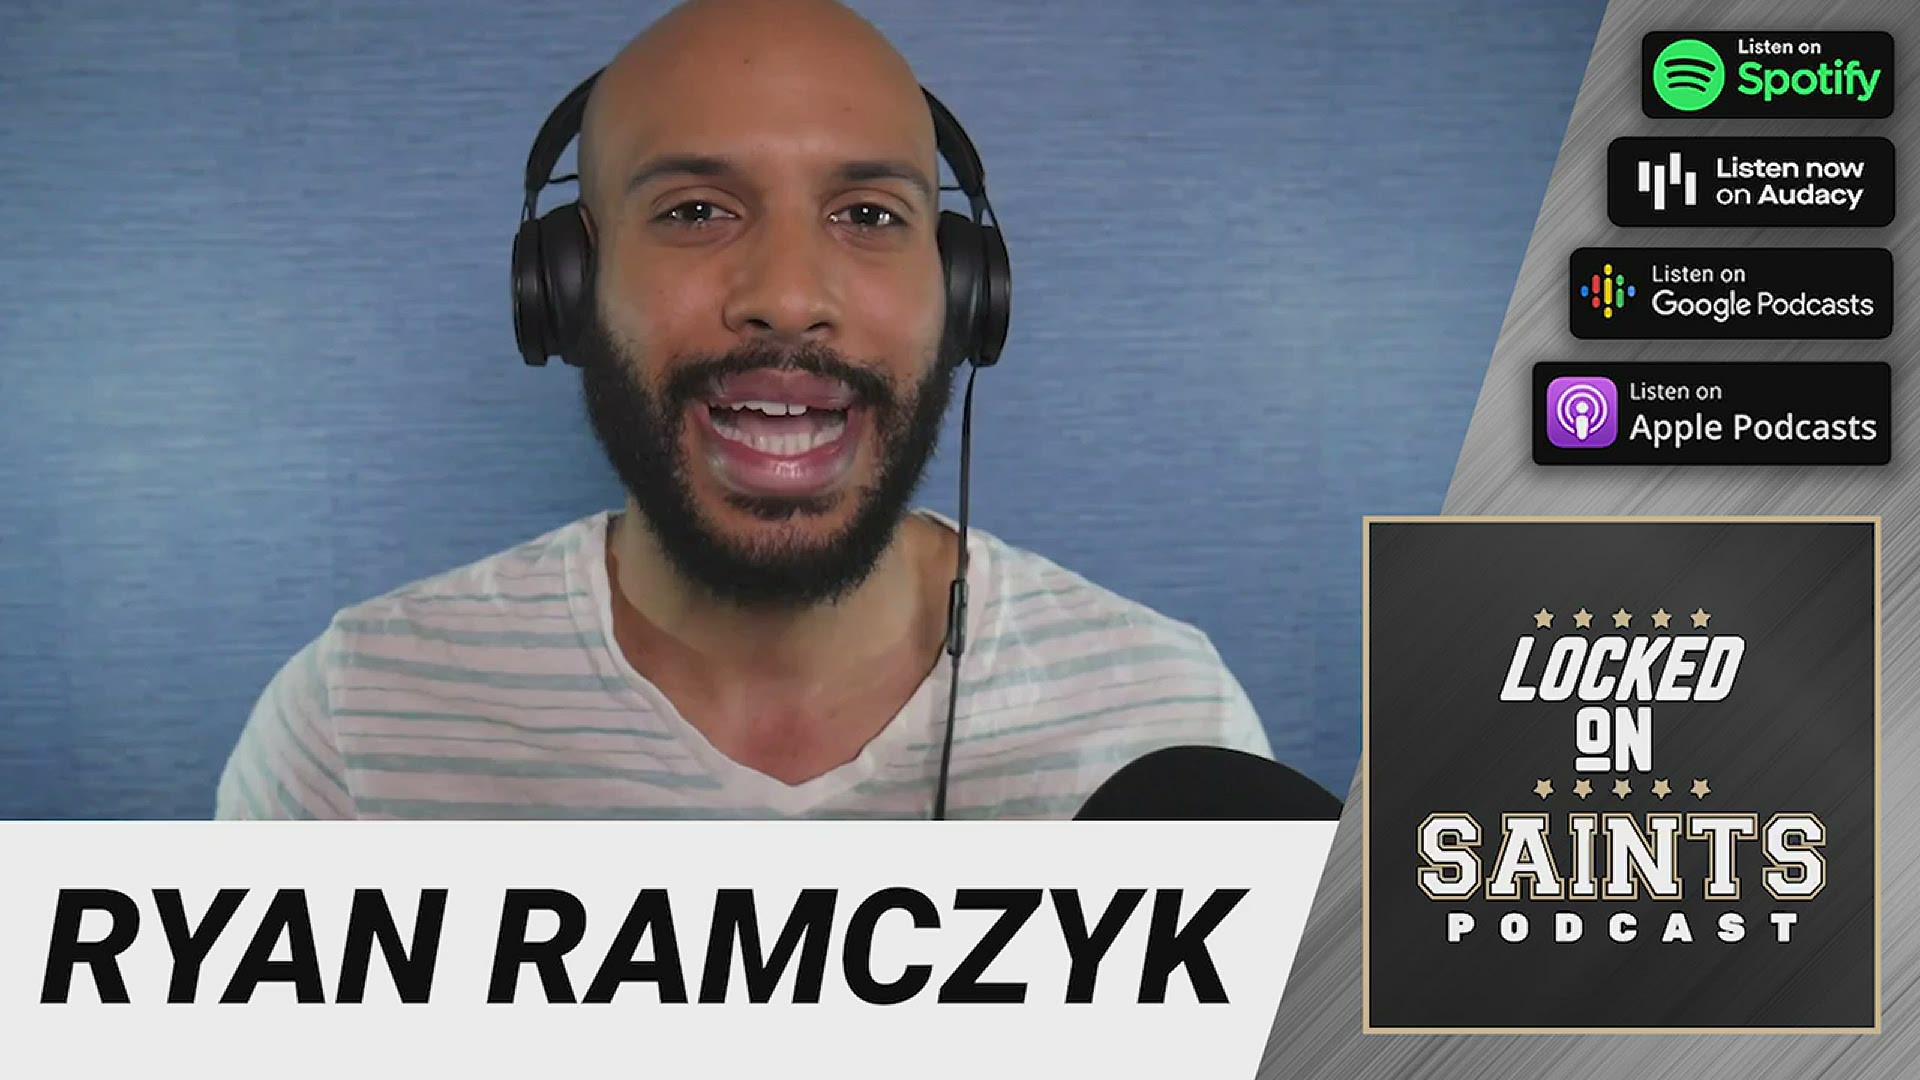 Ross Jackson has the information on the Ryan Ramczyk signing and why it's a big deal for the Saints.